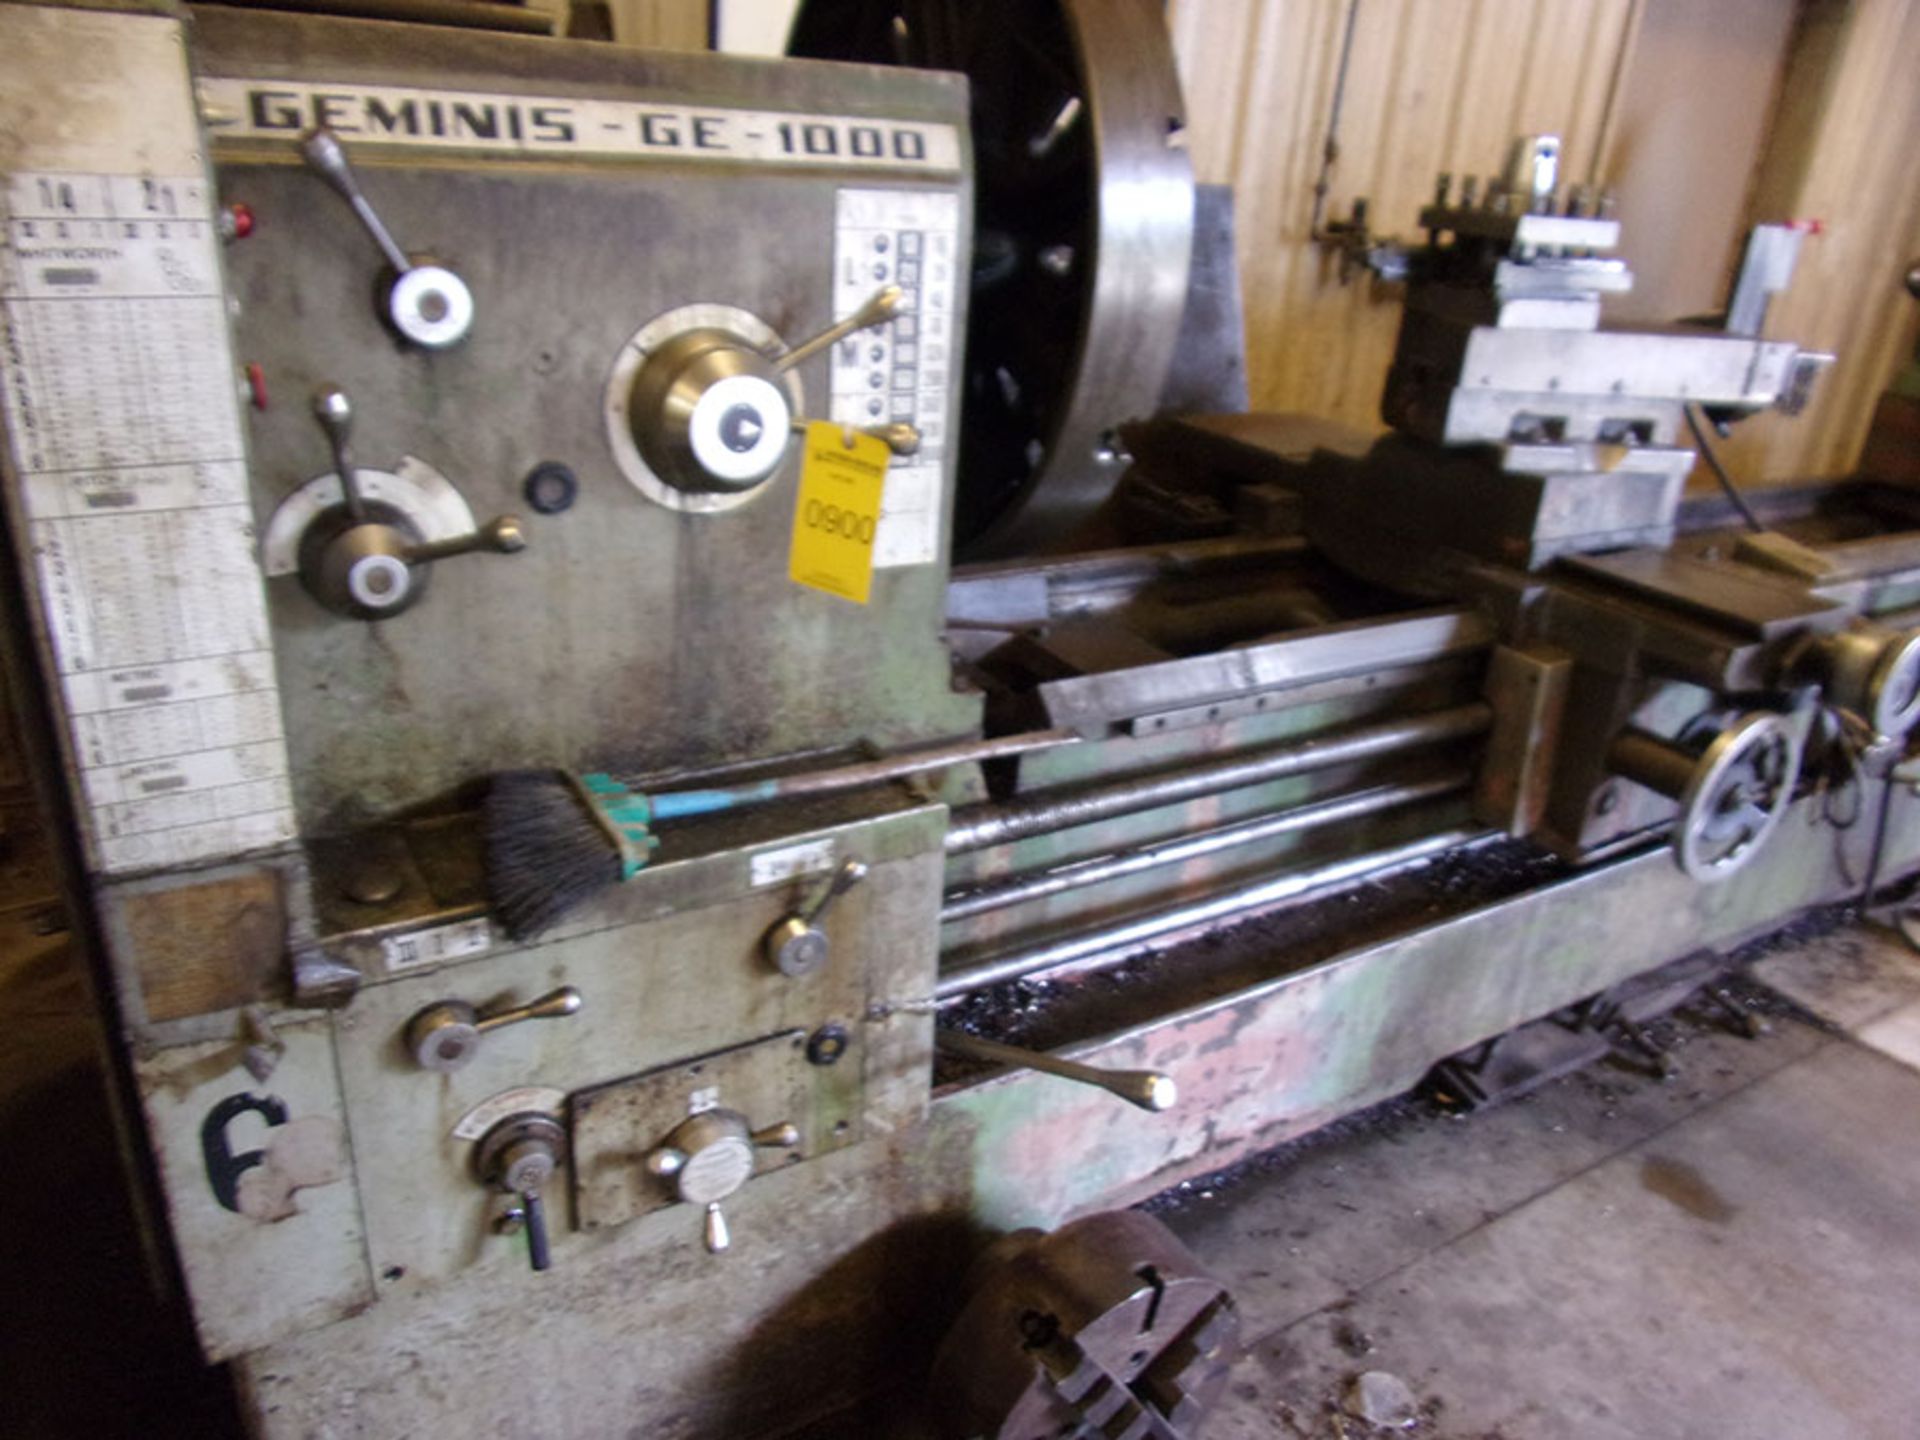 GEMINIS GE-1000 LATHE 15' ENGINE LATHE, 36'' SWING, 18'' OVER CENTER, TAILSTOCK, STEADY REST,